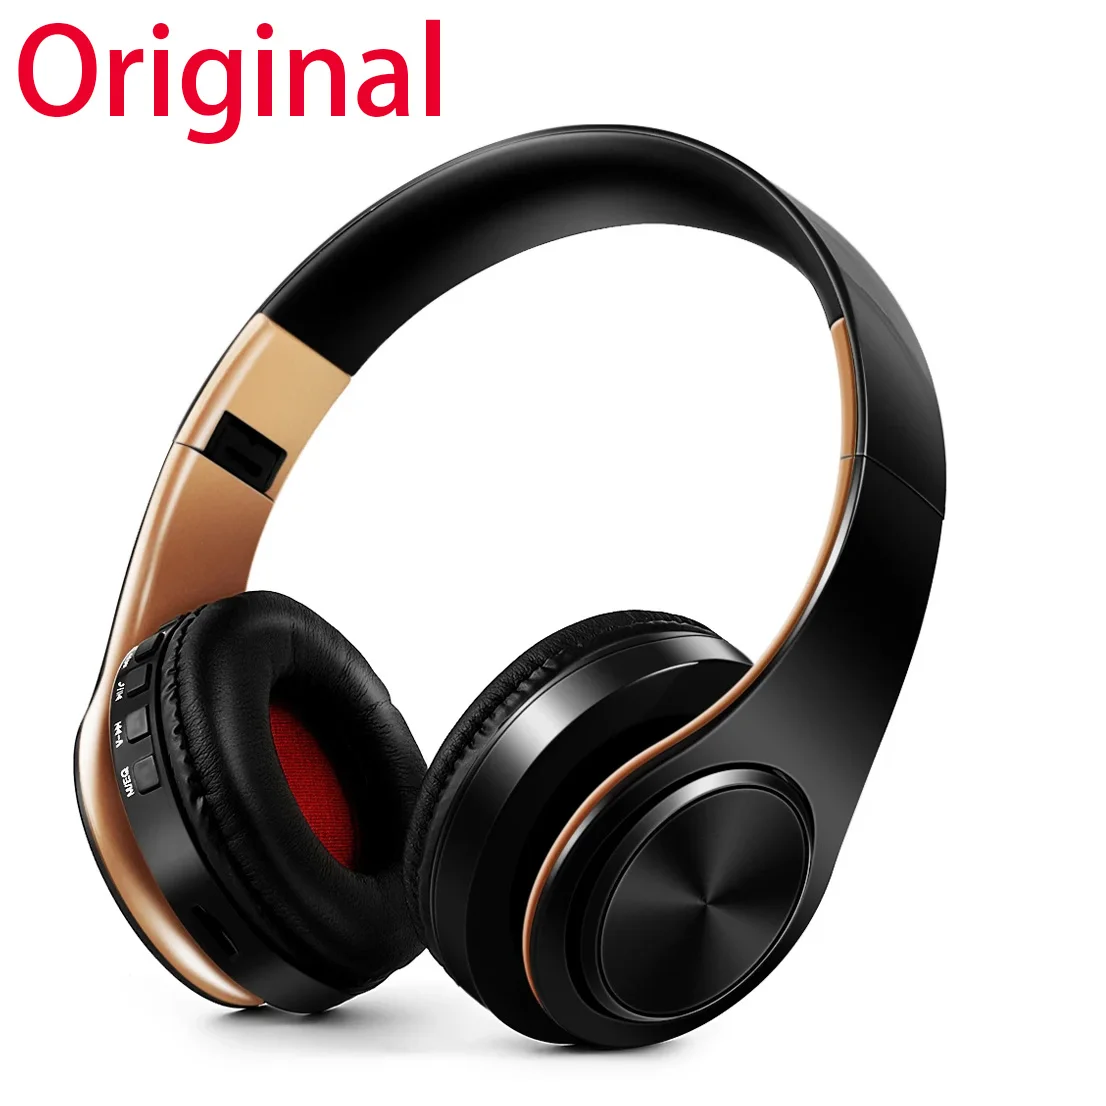 Original Hi-fi stereo headset Bluetooth headset Music headset FM and support SD card with microphone mobile Xiaomi Iphone tablet enlarge